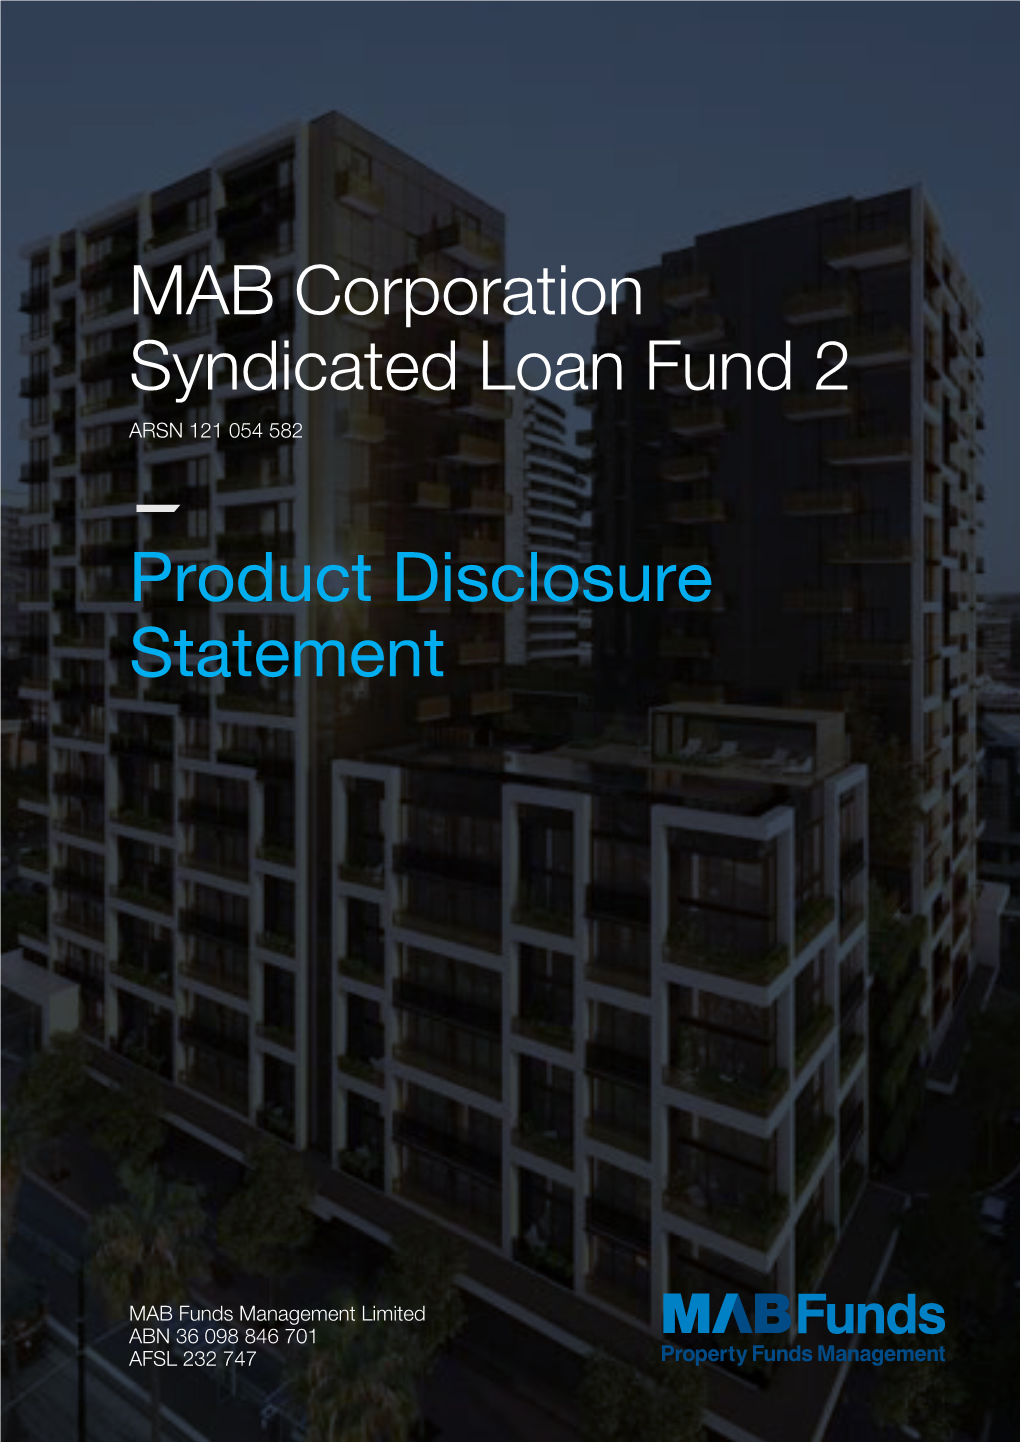 Product Disclosure Statement MAB Corporation Syndicated Loan Fund 2